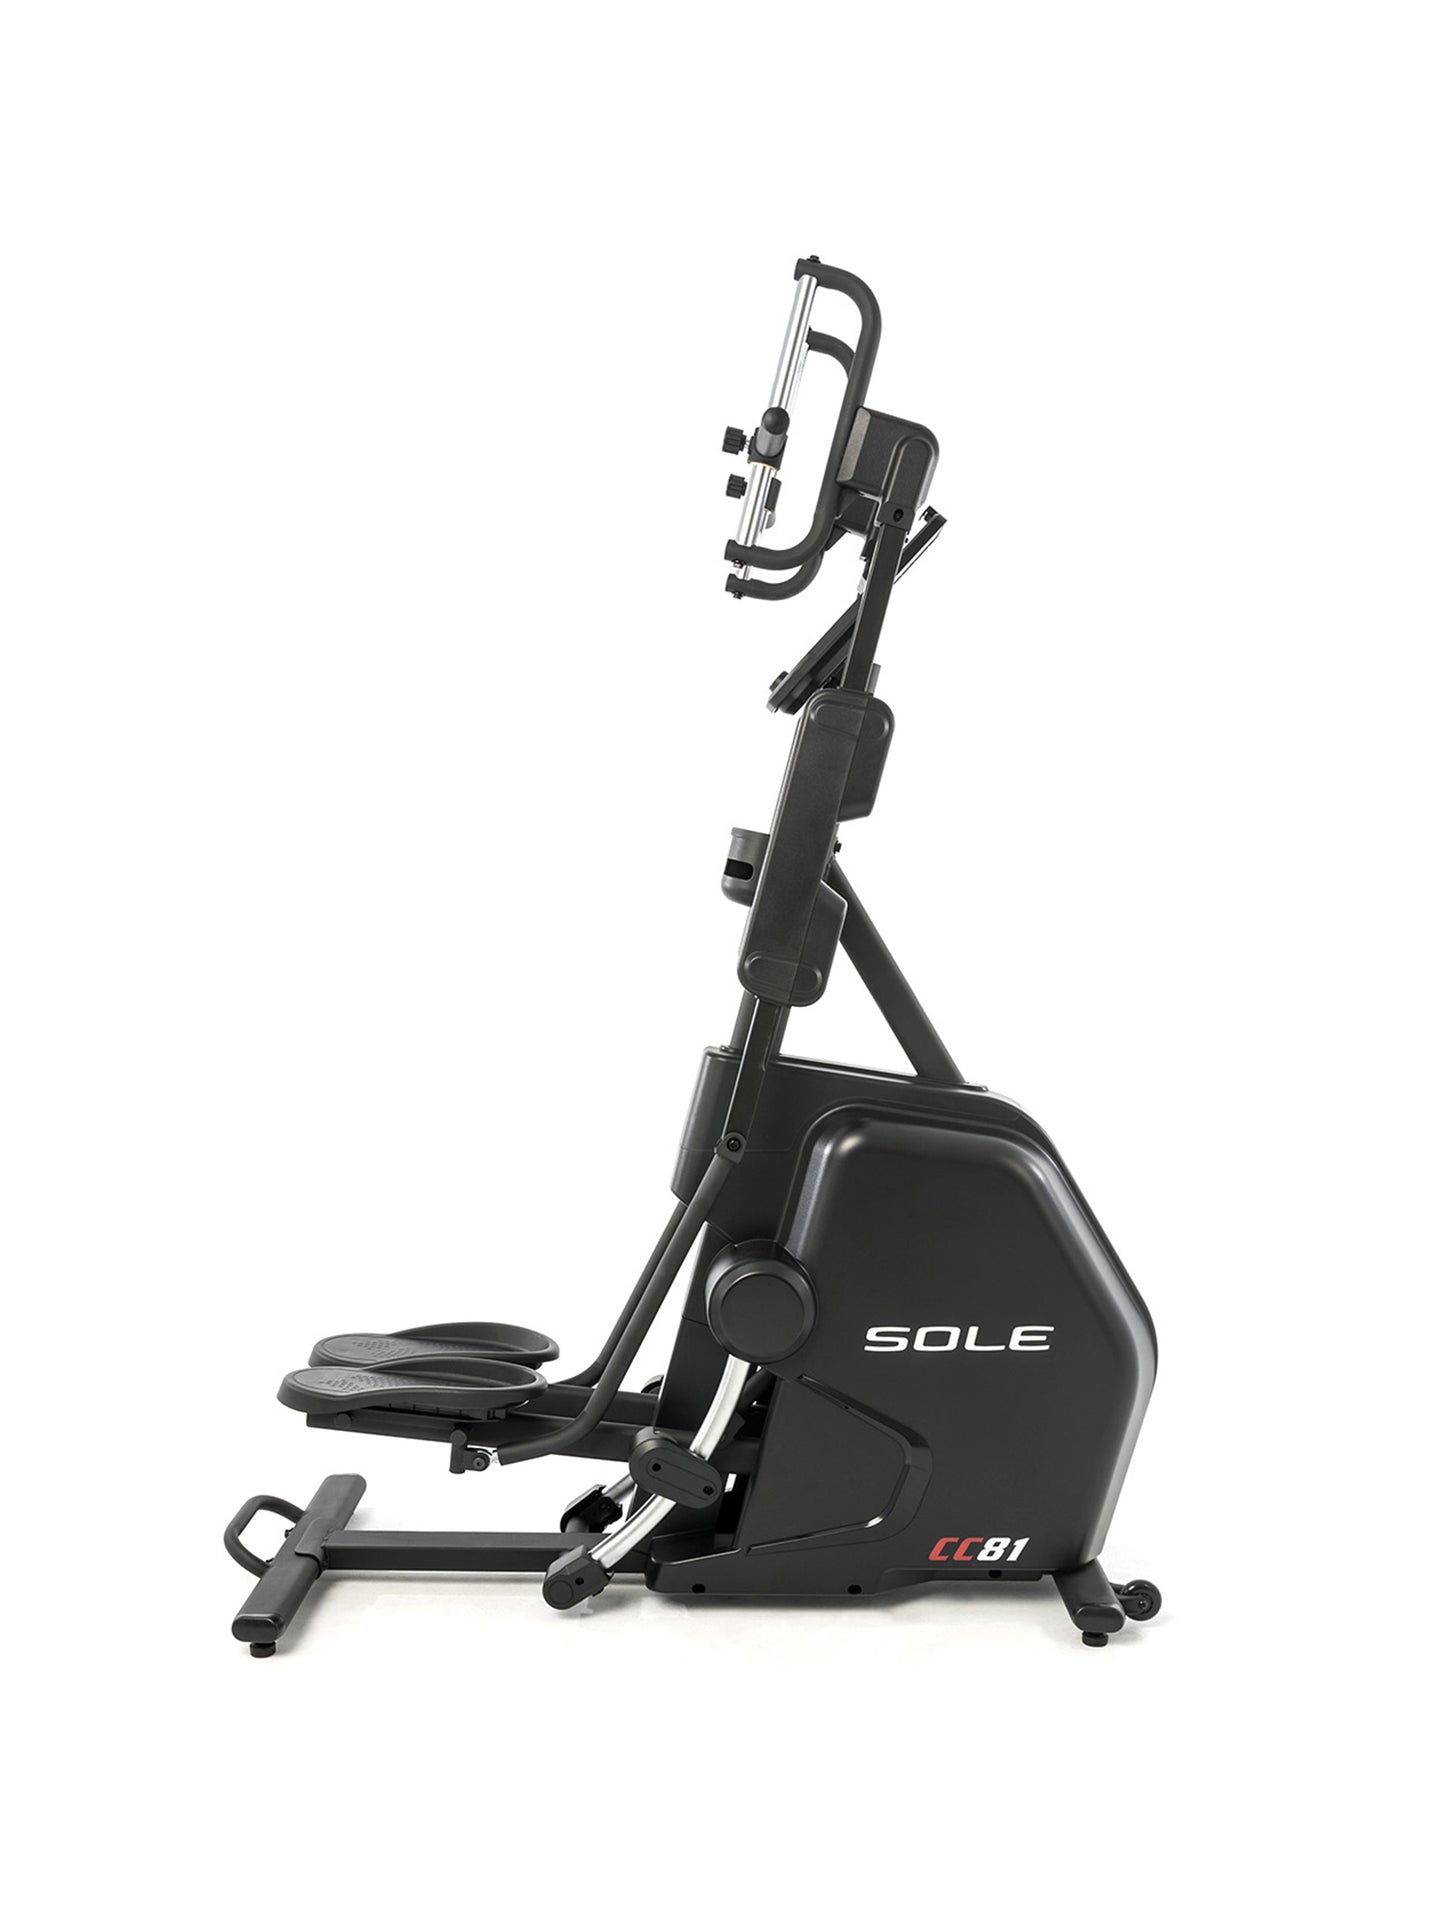 Sole Fitness Climber Cc81 Full View